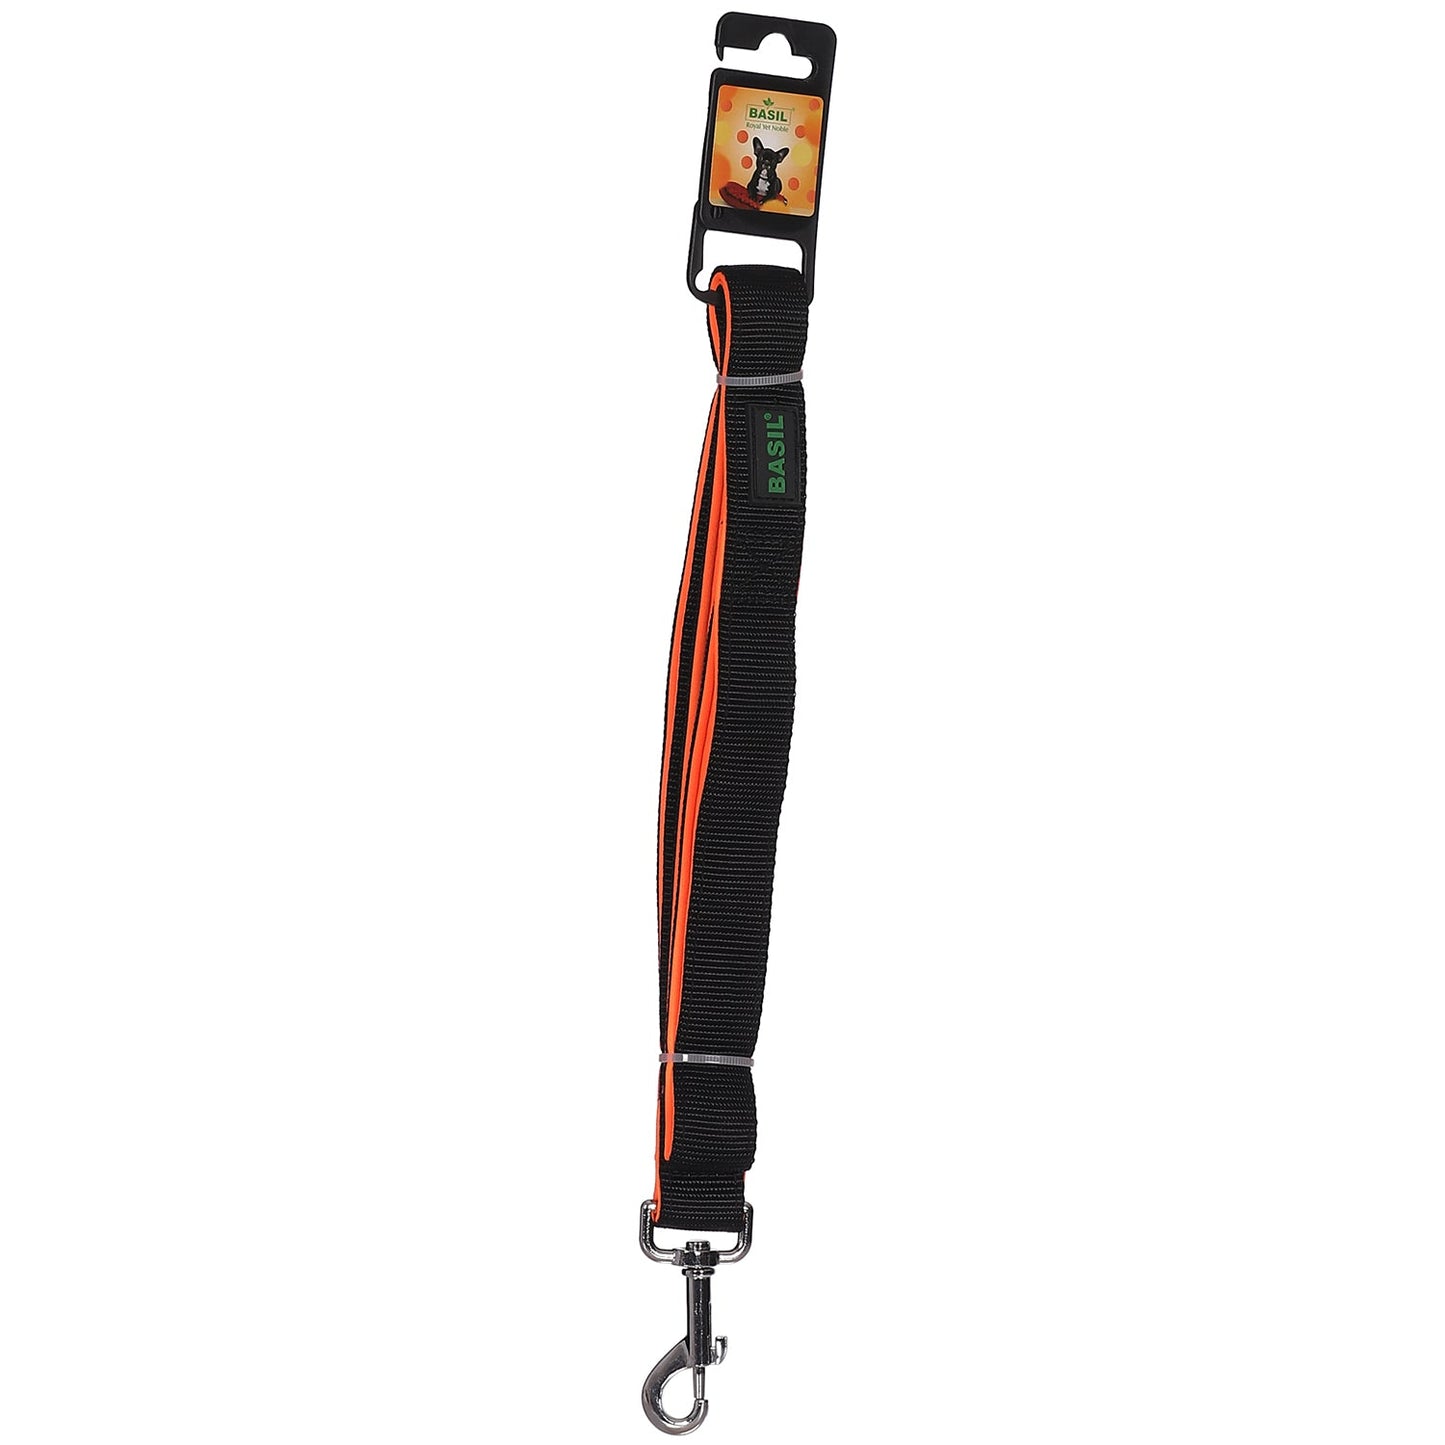 Basil Padded Leash for Dogs & Puppies (Black)